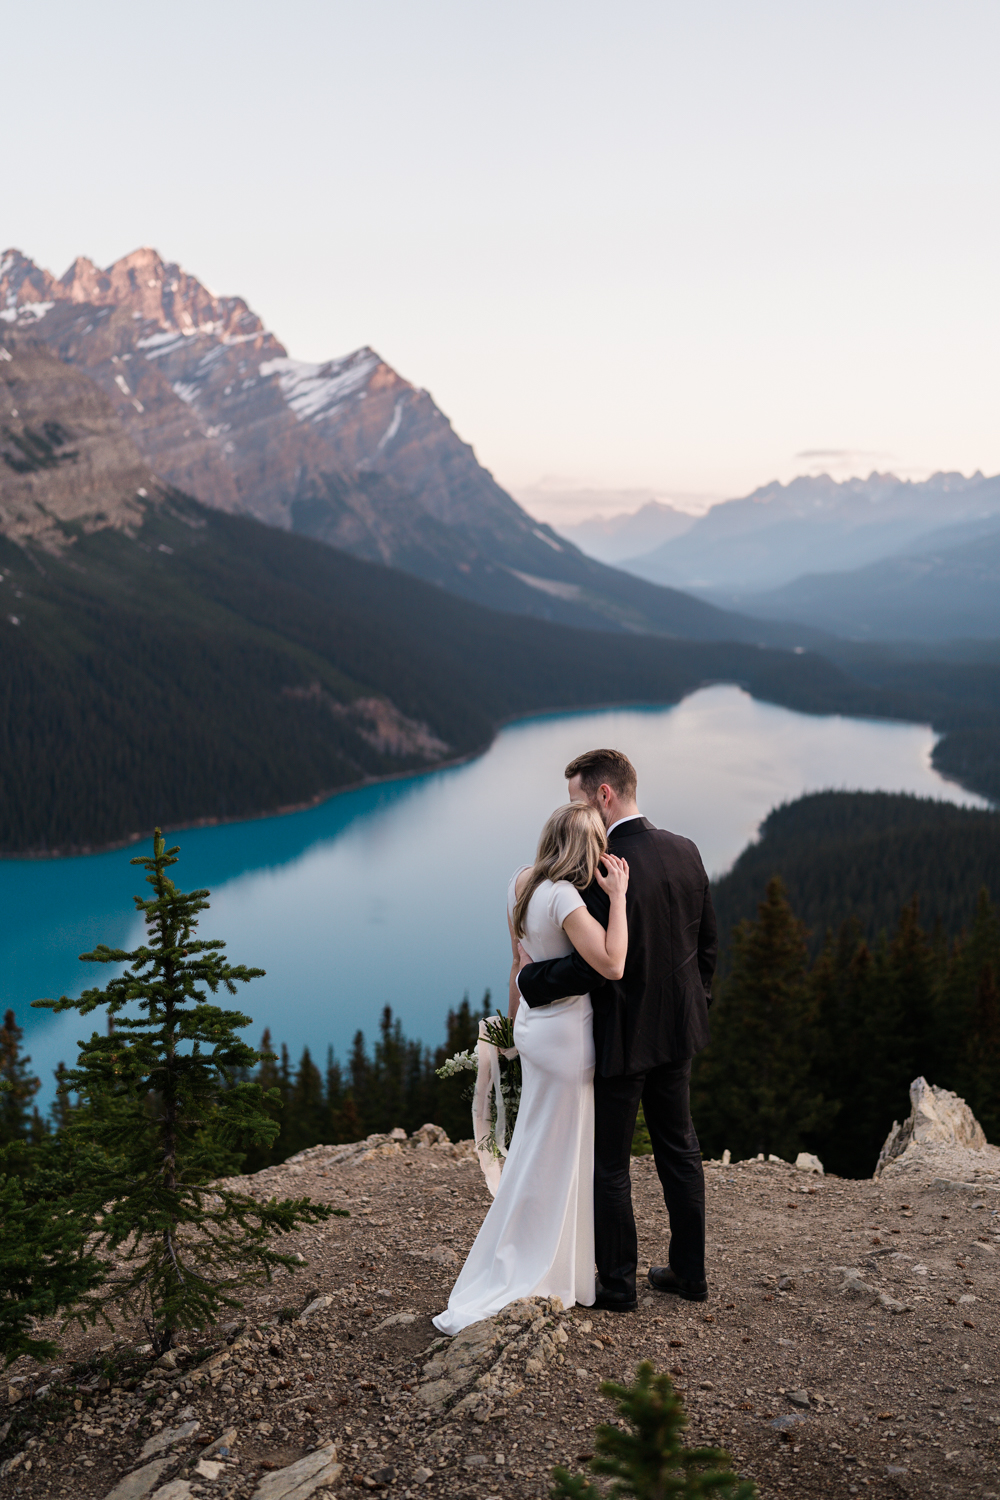 How to Elope in Banff: A Banff Elopement Planning Guide - Dom Autumn Photo